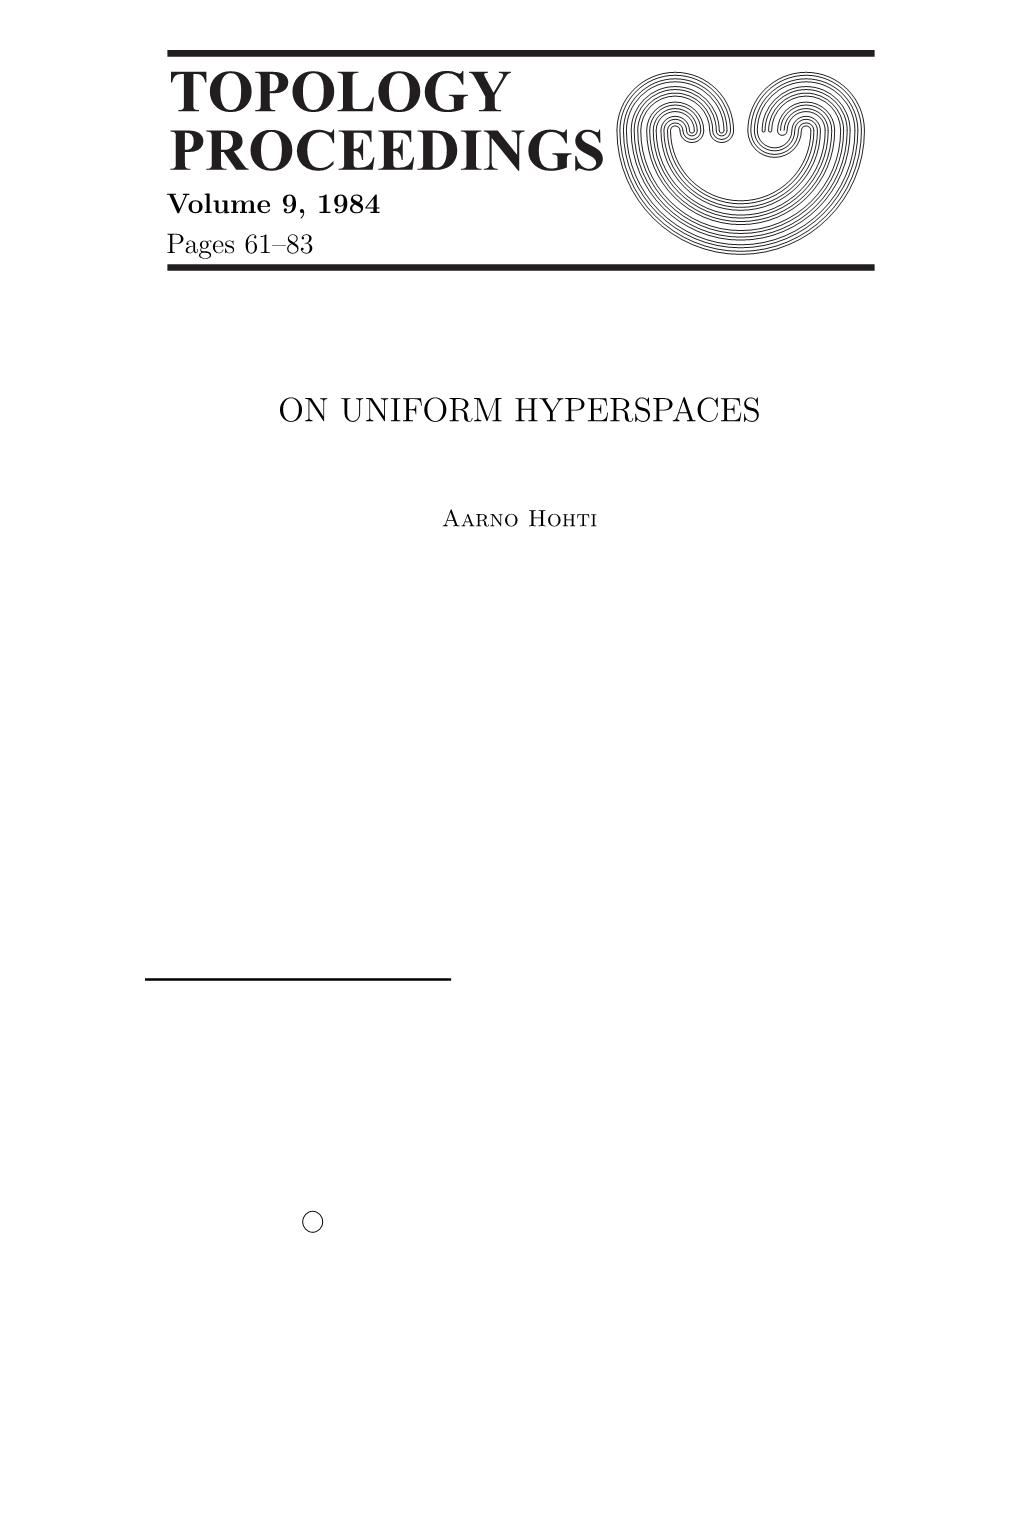 Topology Proceedings 9 (1984) Pp. 61-83: on UNIFORM HYPERSPACES